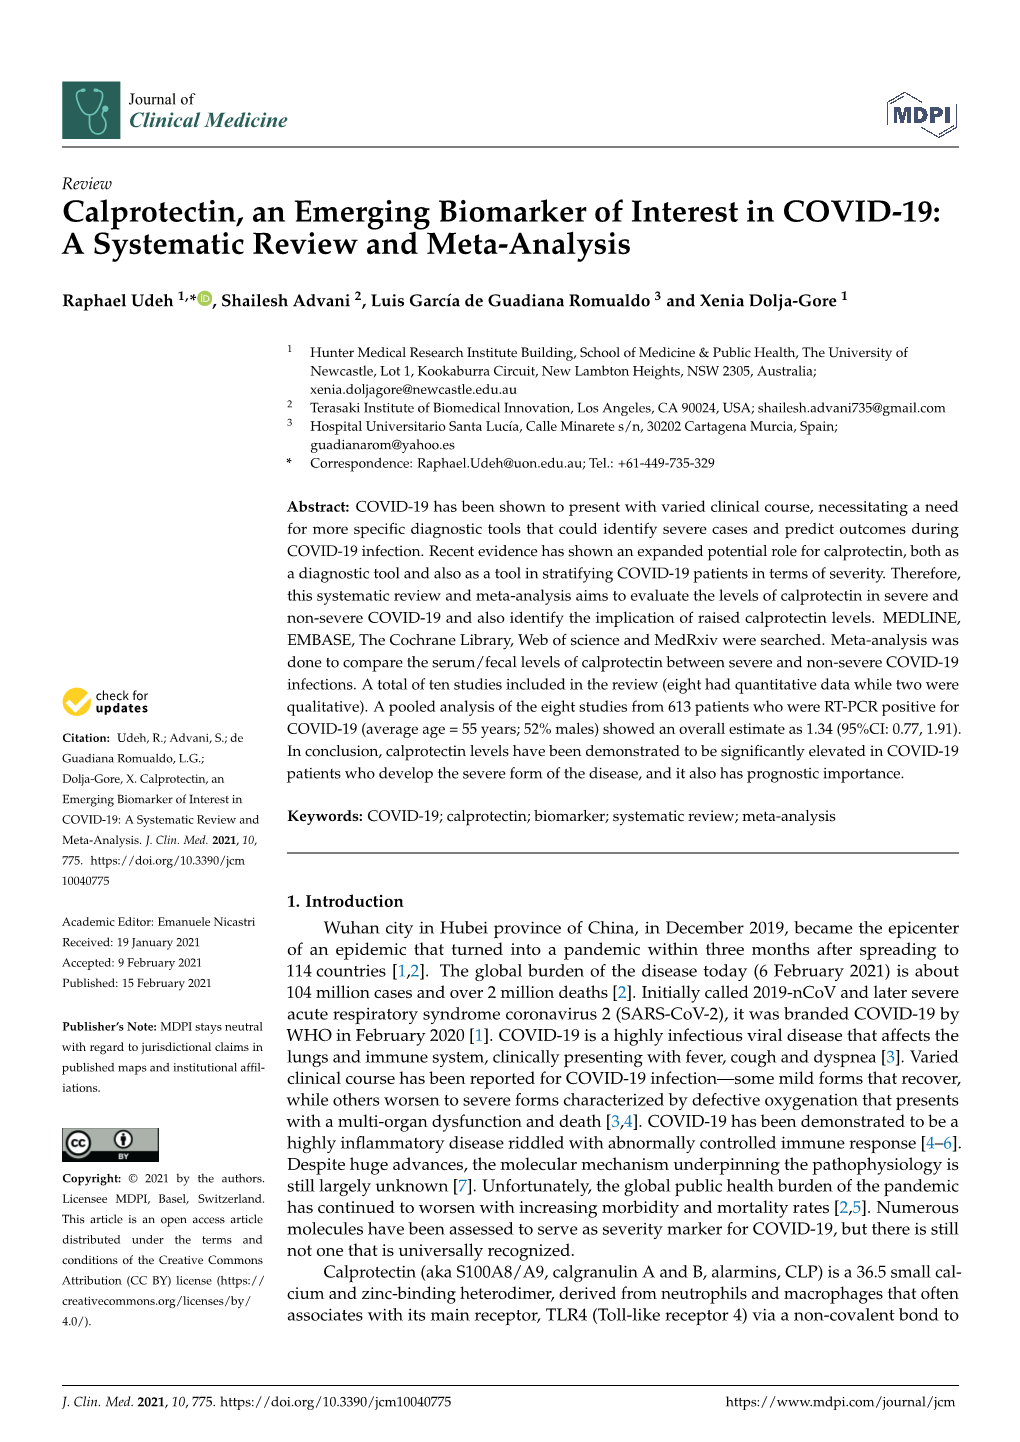 Calprotectin, an Emerging Biomarker of Interest in COVID-19: a Systematic Review and Meta-Analysis